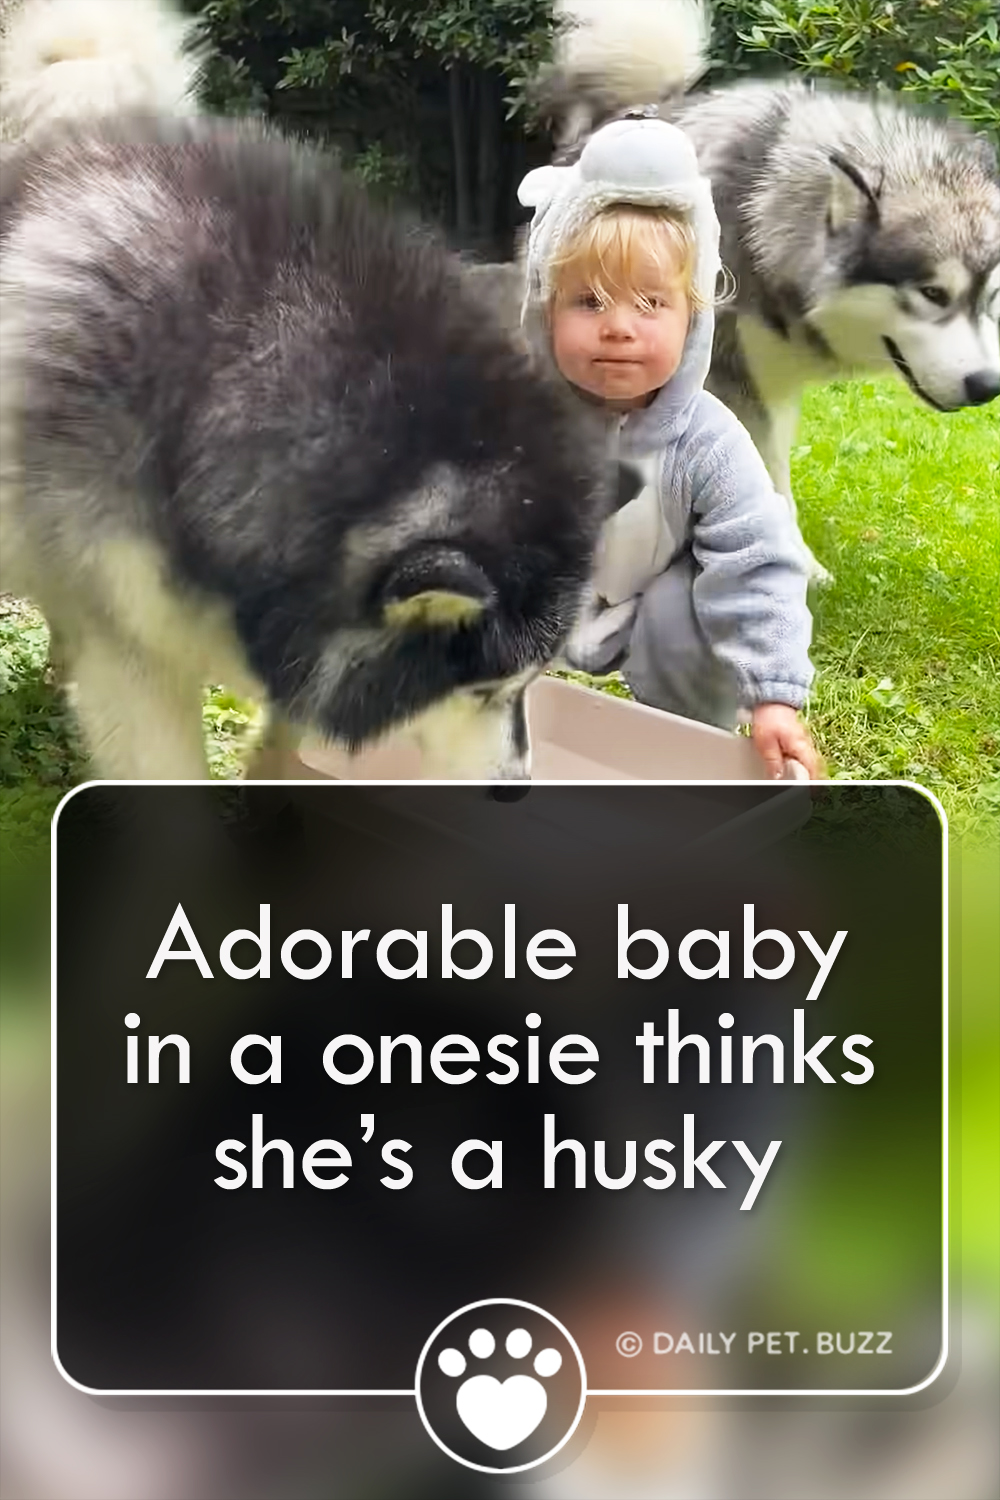 Adorable baby in a onesie thinks she’s a husky